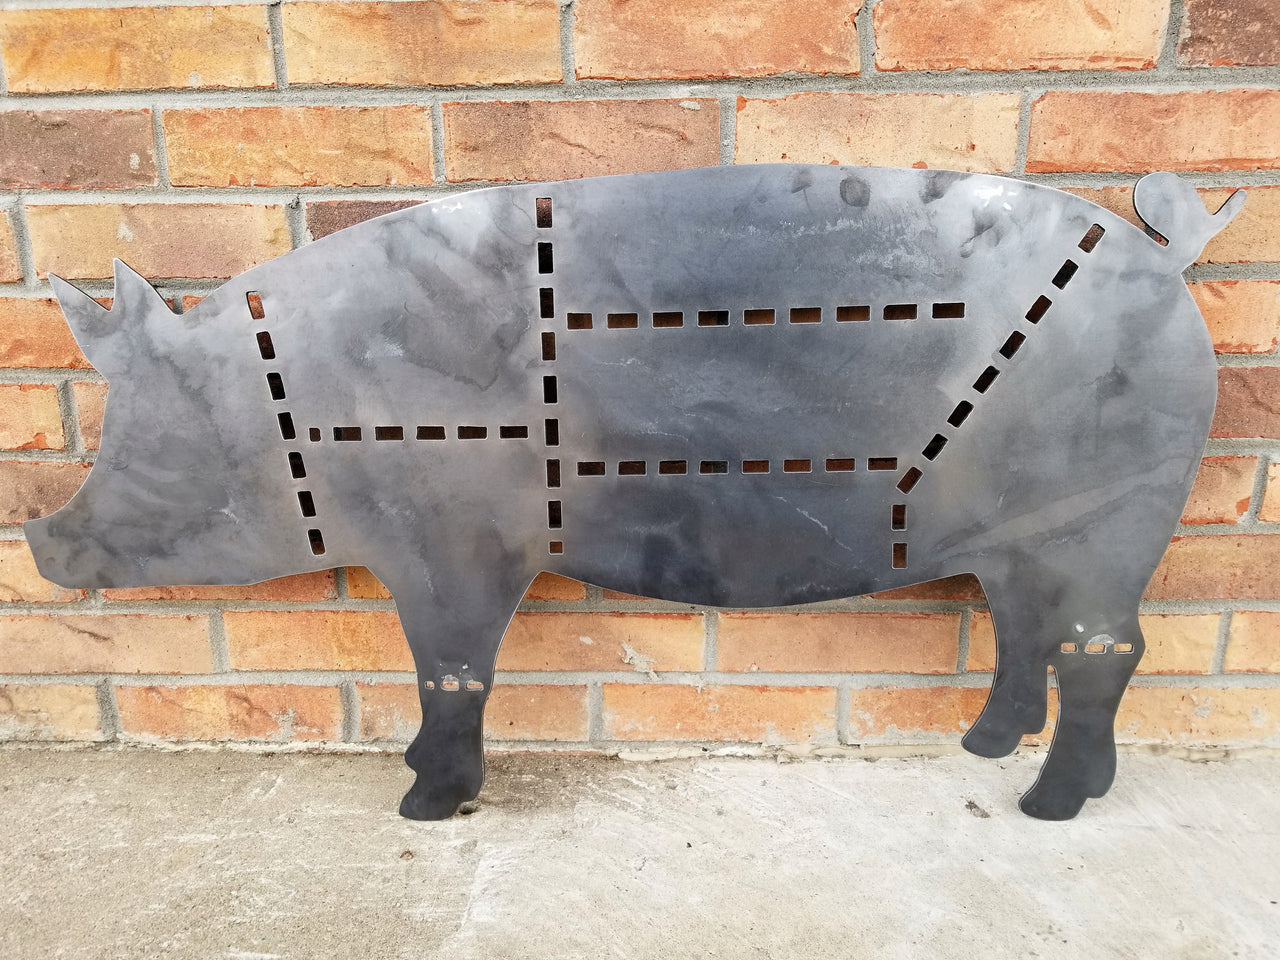 This sign is in the shape of a pig and dotted lines separate the cuts of pork